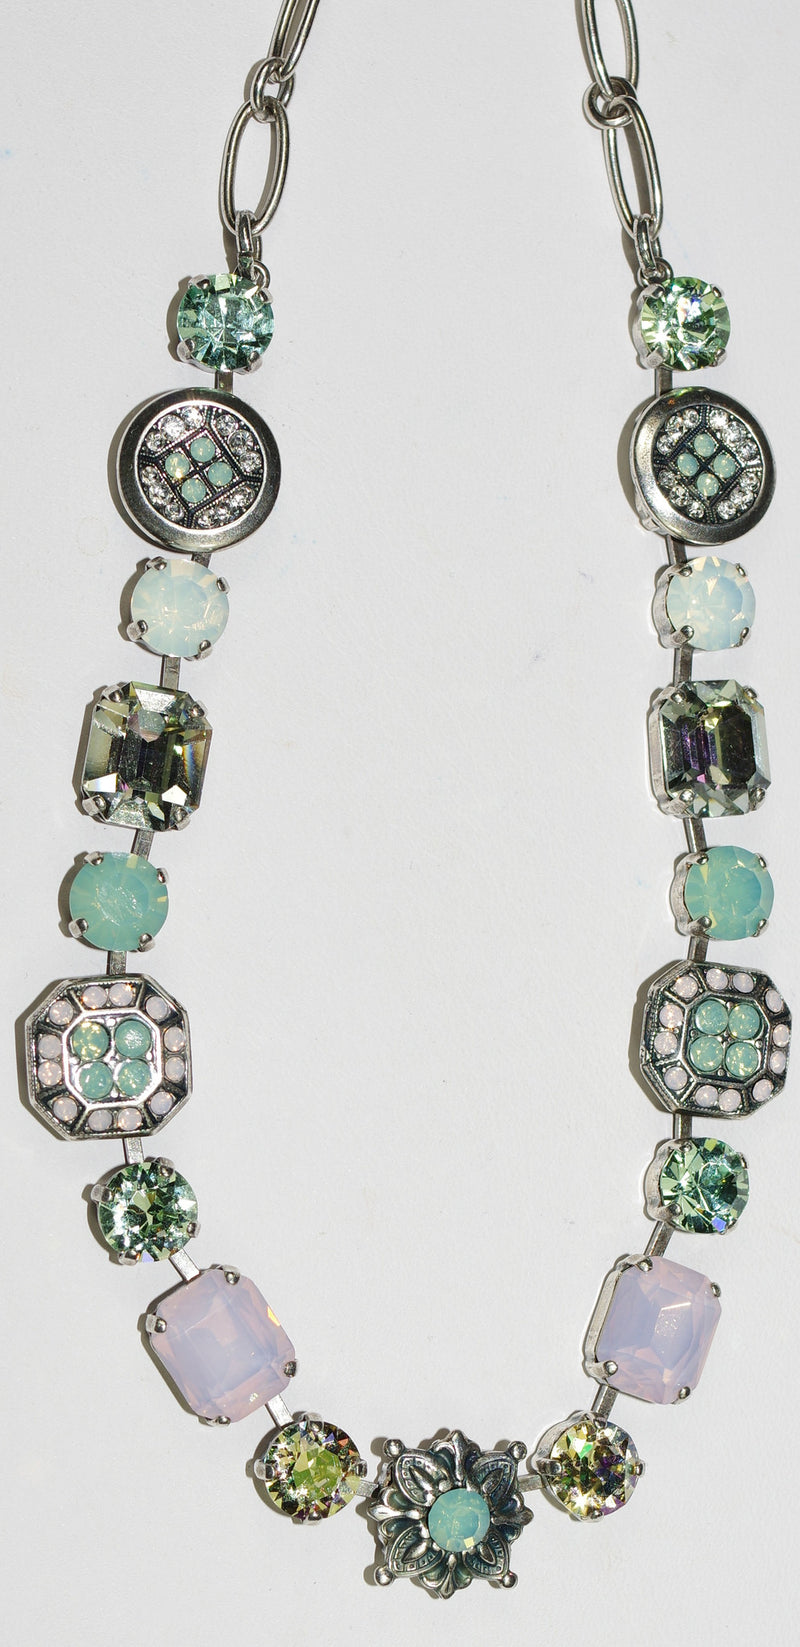 MARIANA NECKLACE PINA COLADA: pacific opal, pink, green stones, in 17" silver adjustable chain